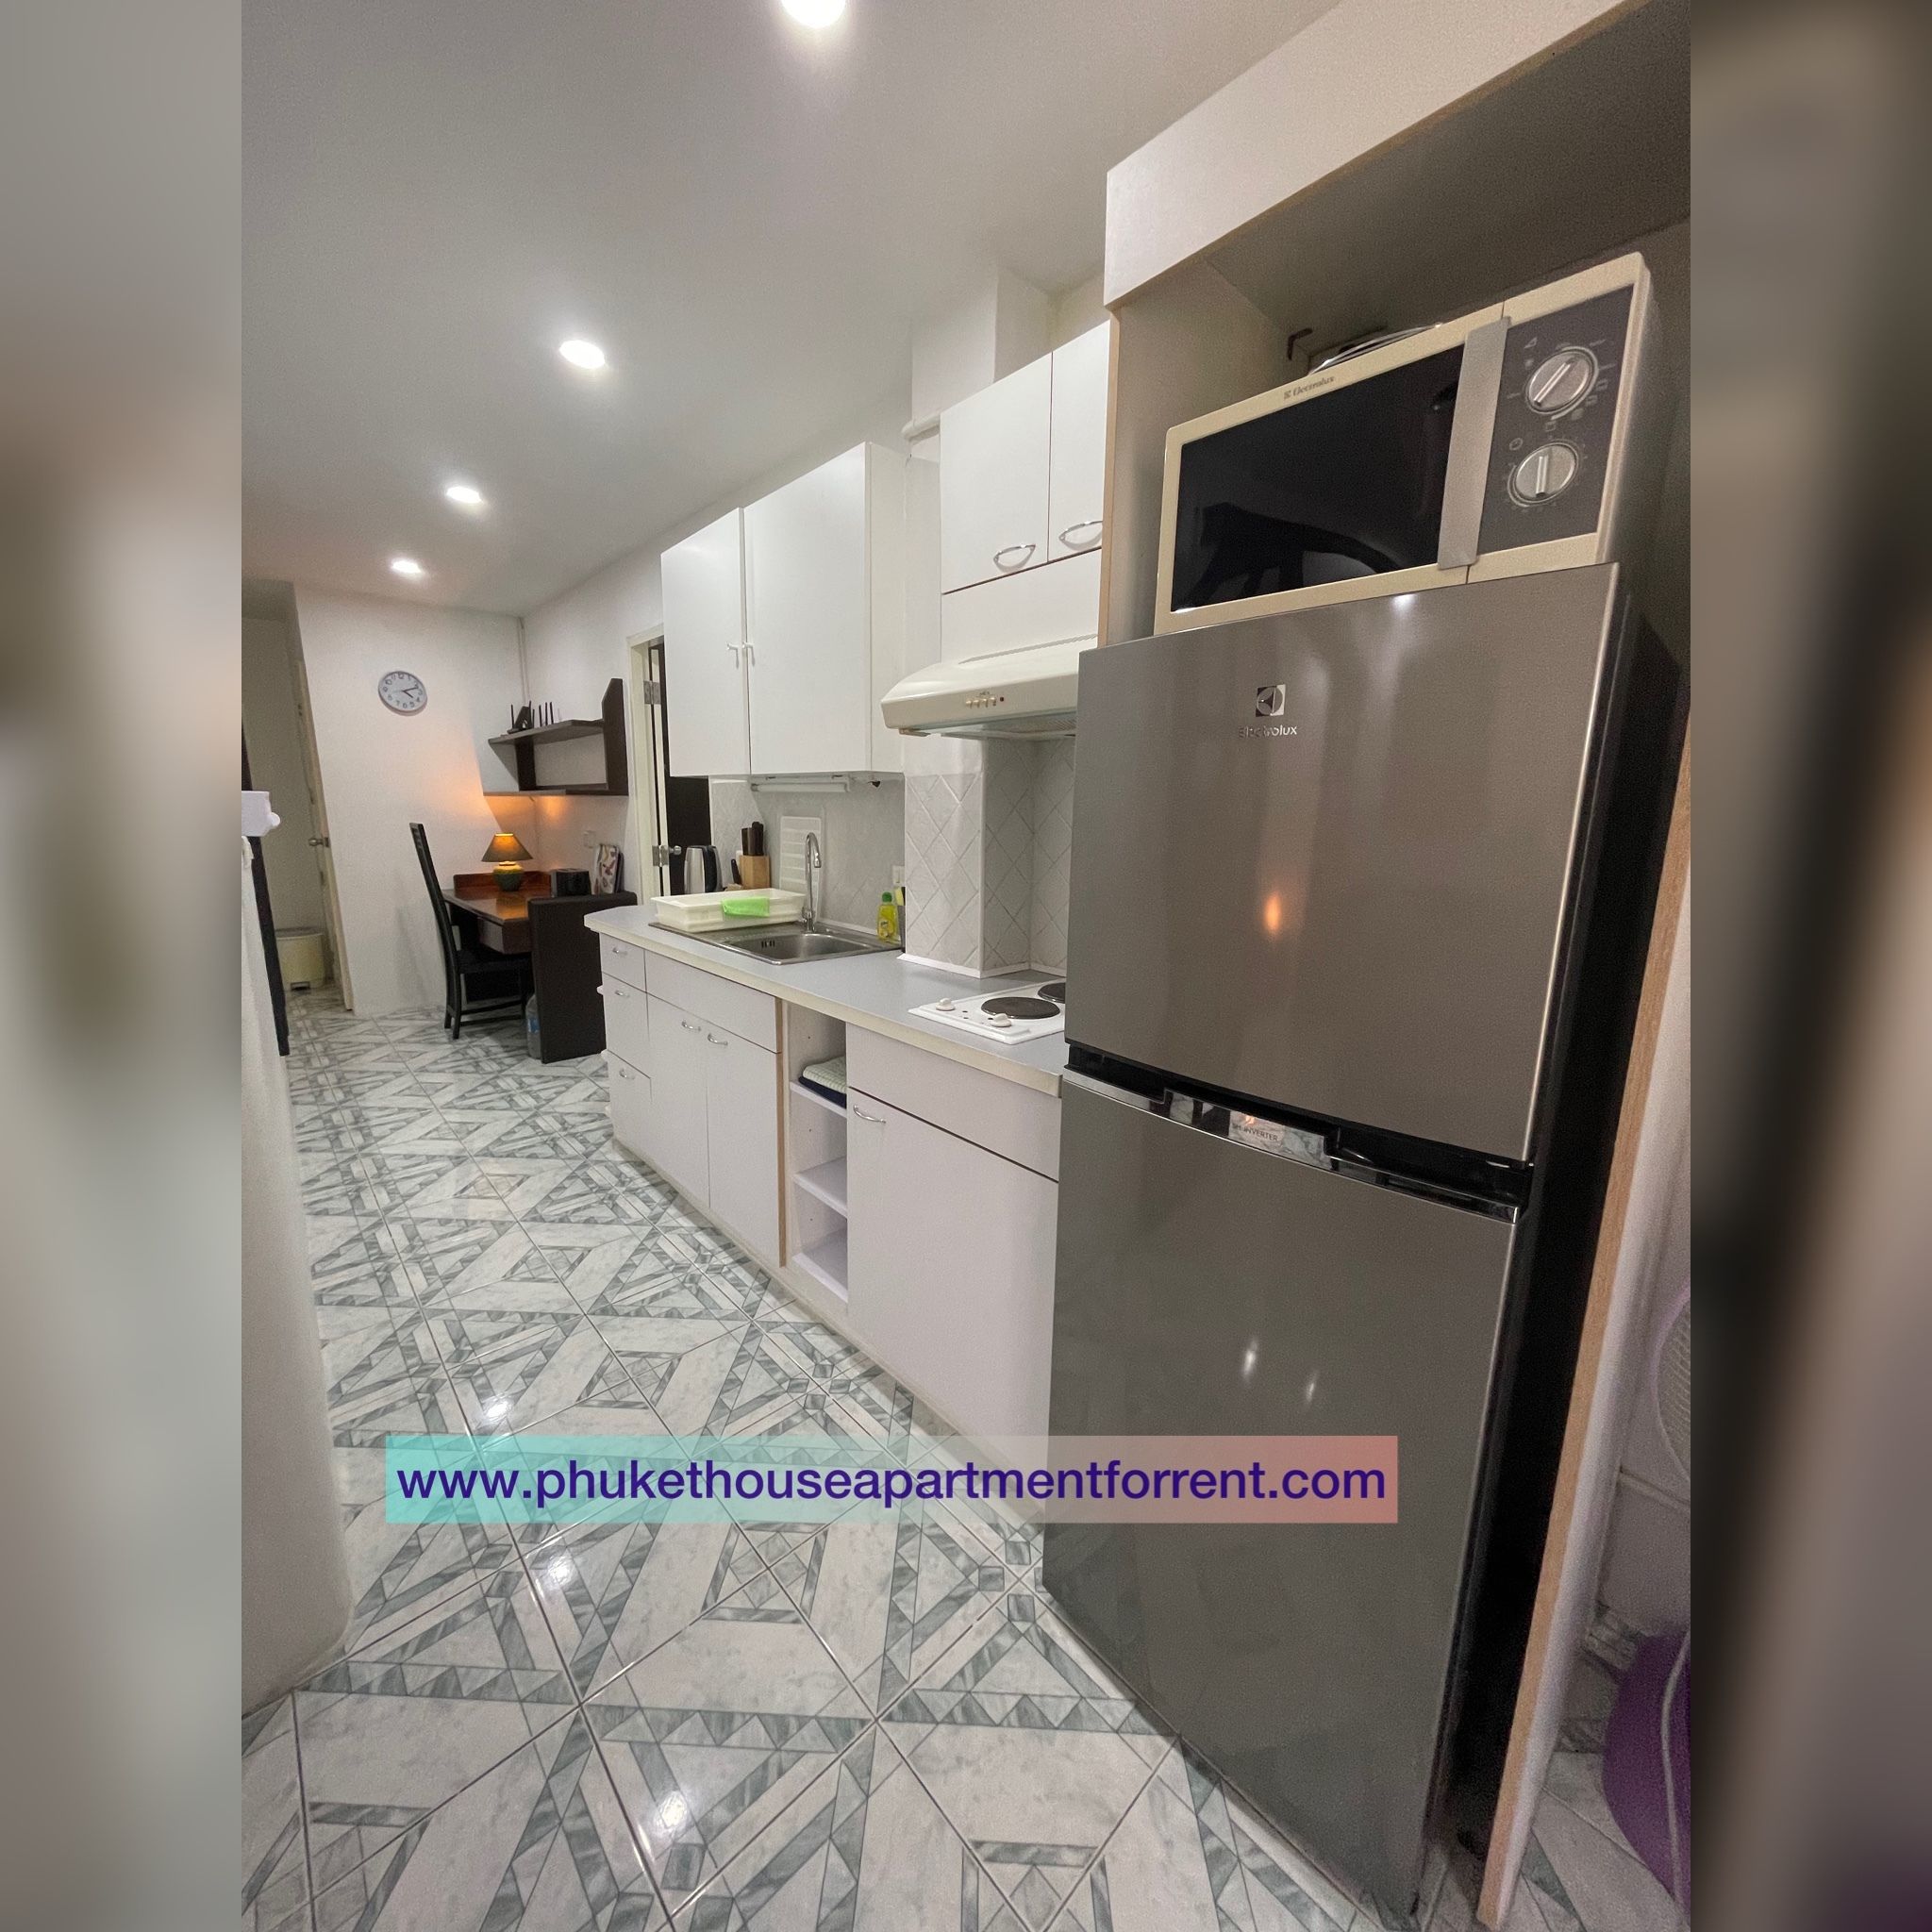 2 Bedrooms apartment/ Kamala for rent